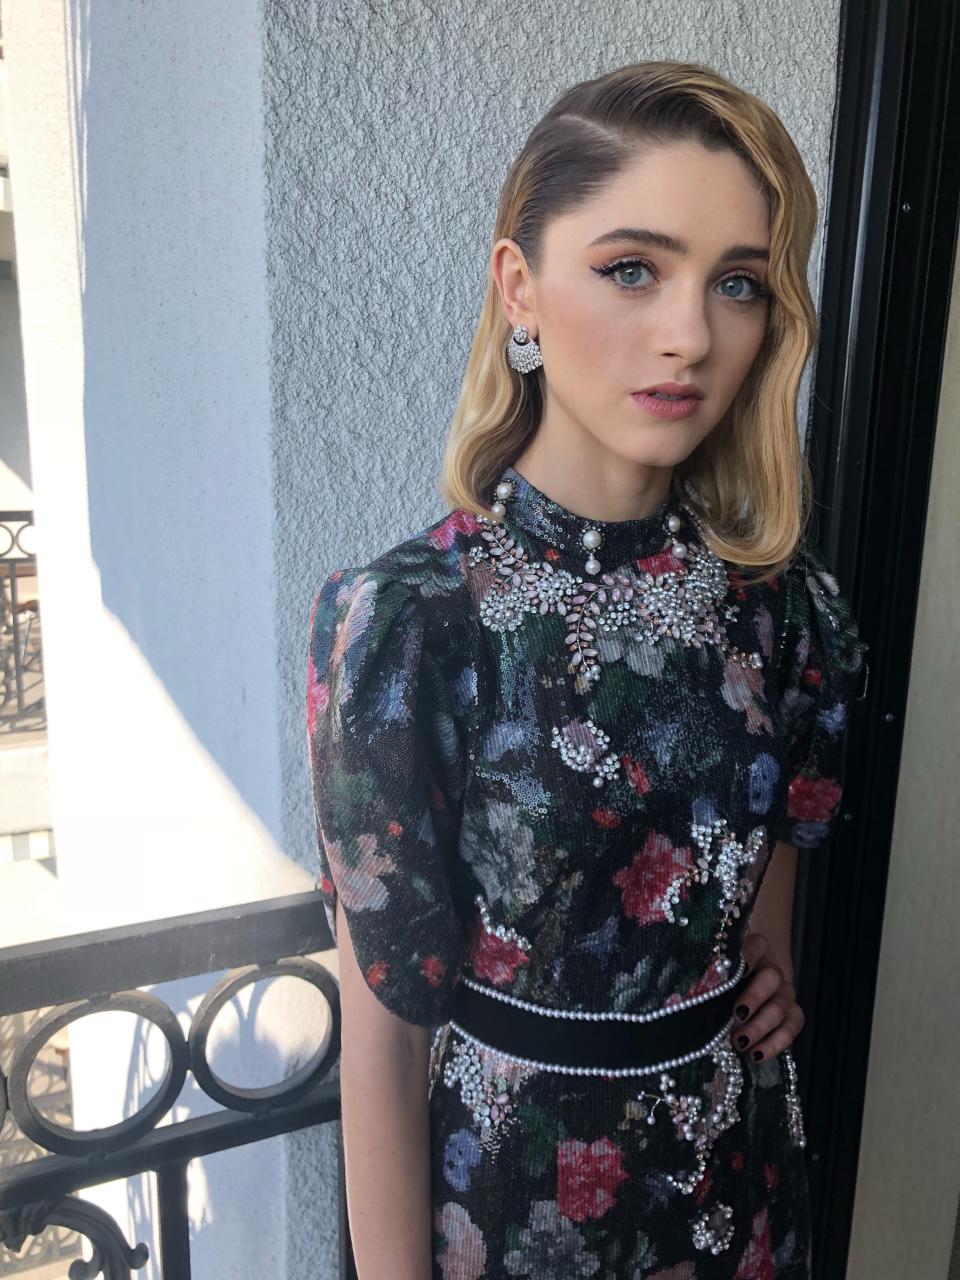 Stranger Things' Natalia Dyer is wearing three different mascaras at the 2018 Critics' Choice Awards, according to her makeup artist.